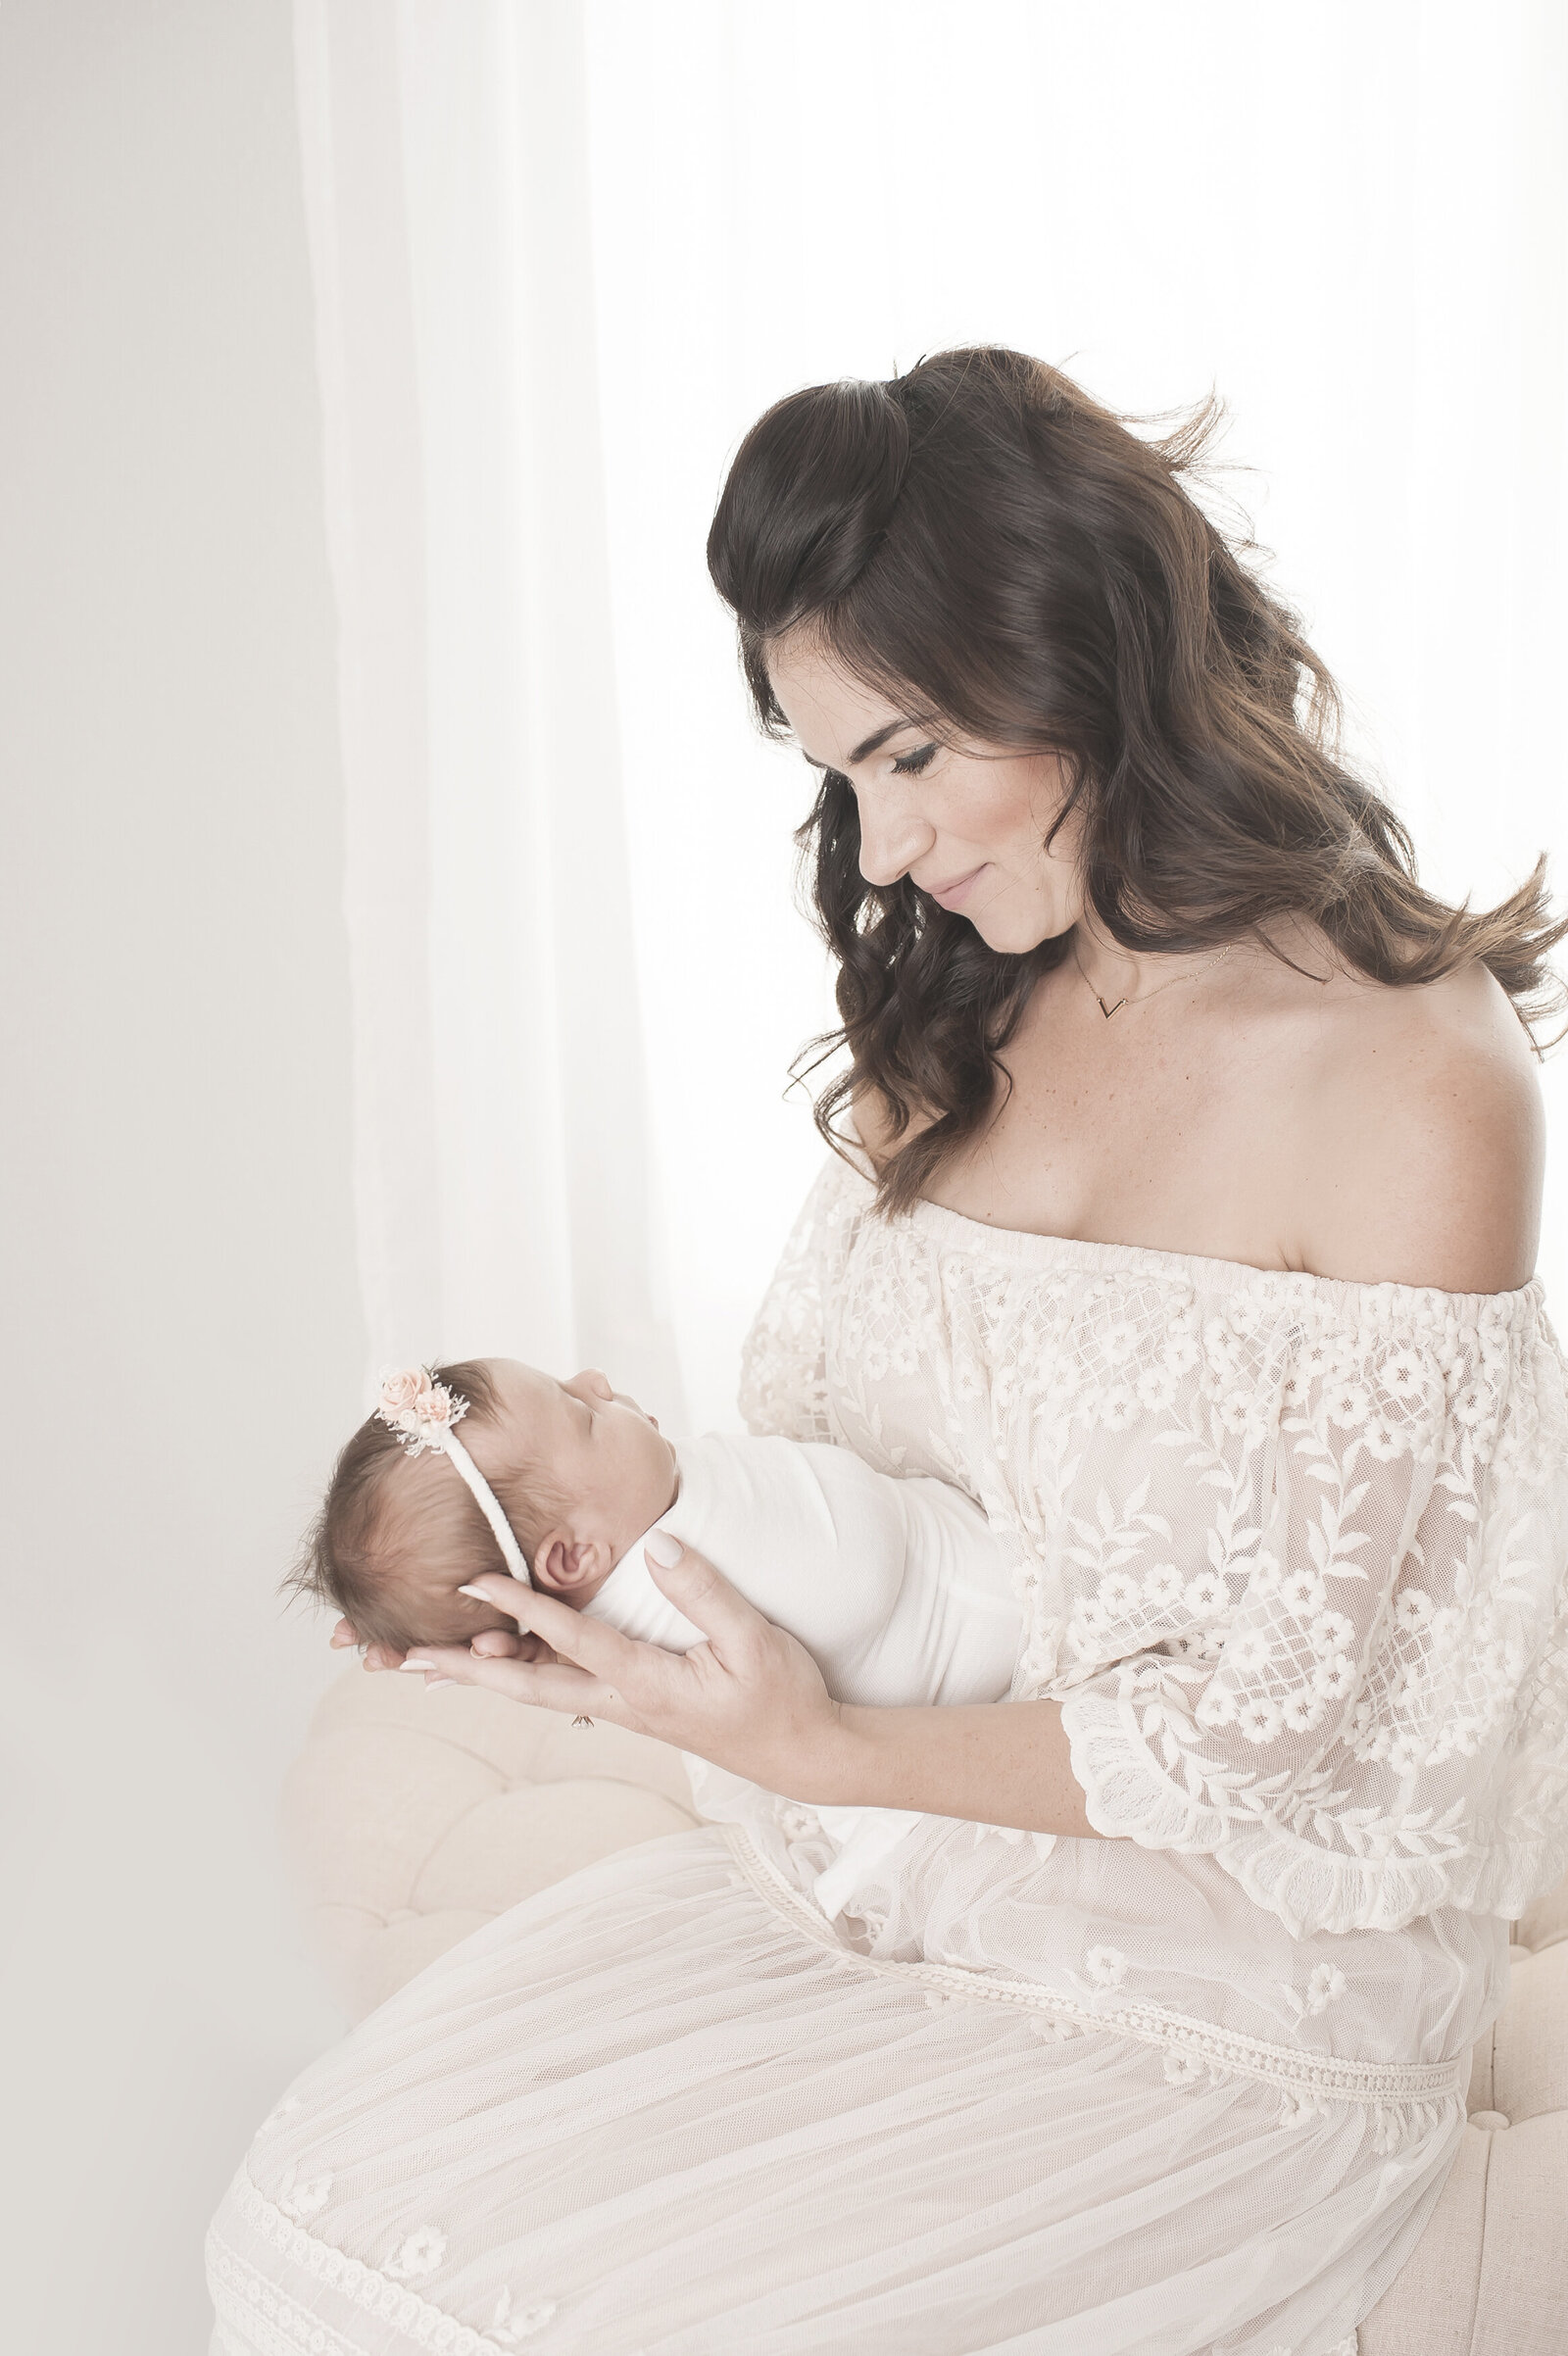 Woman in lace dress holding newborn baby girl